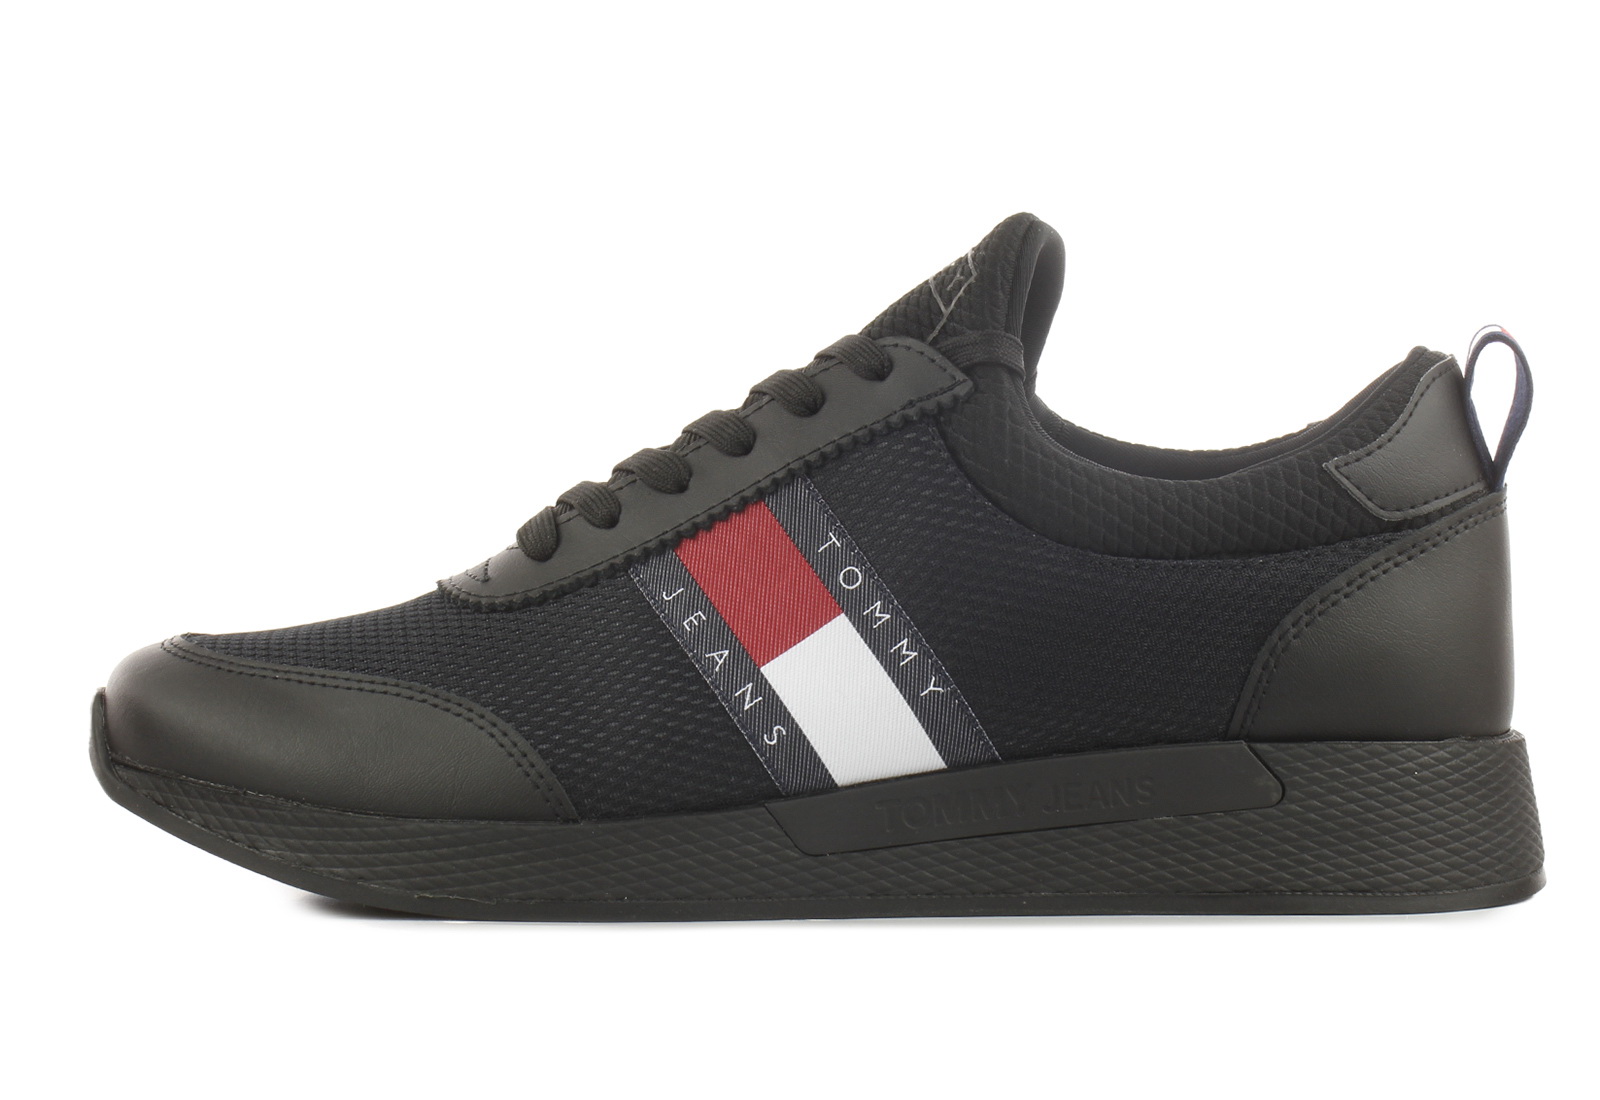 Tommy Hilfiger - Blake 15c2 - EM0-0959-BDS - Online shop for sneakers, and boots